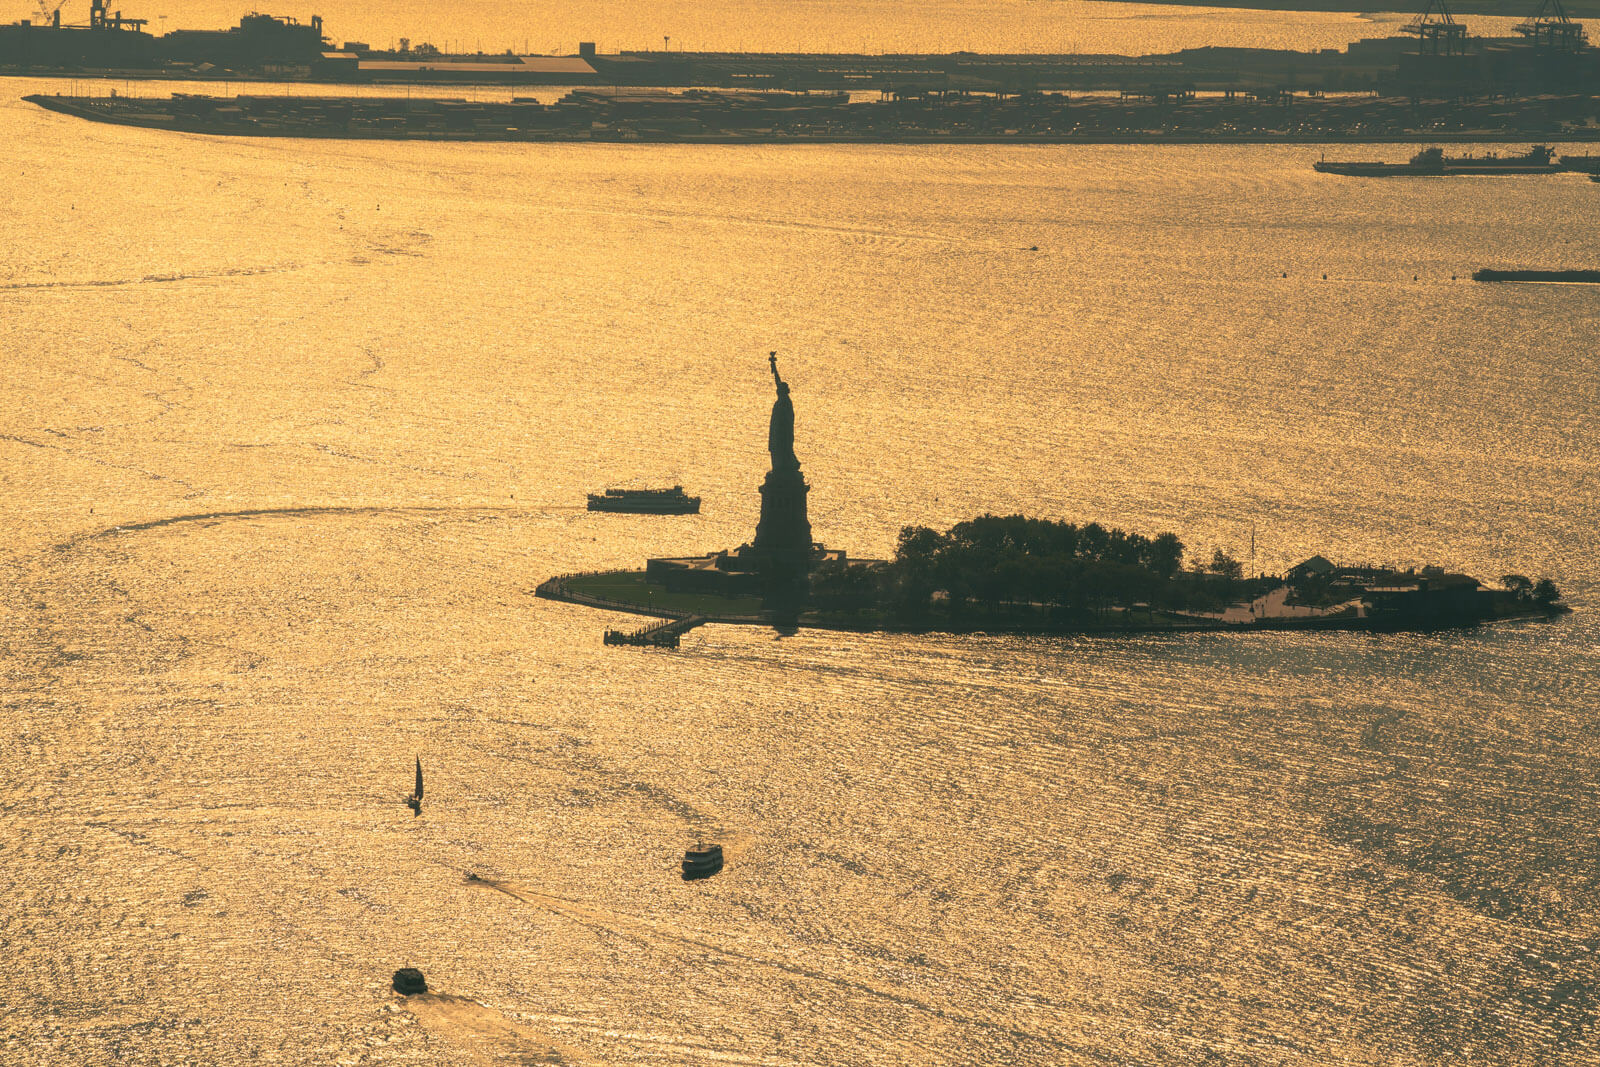 View of Statue of Liberty from one world trade center observatory in NYC in New York Harbor